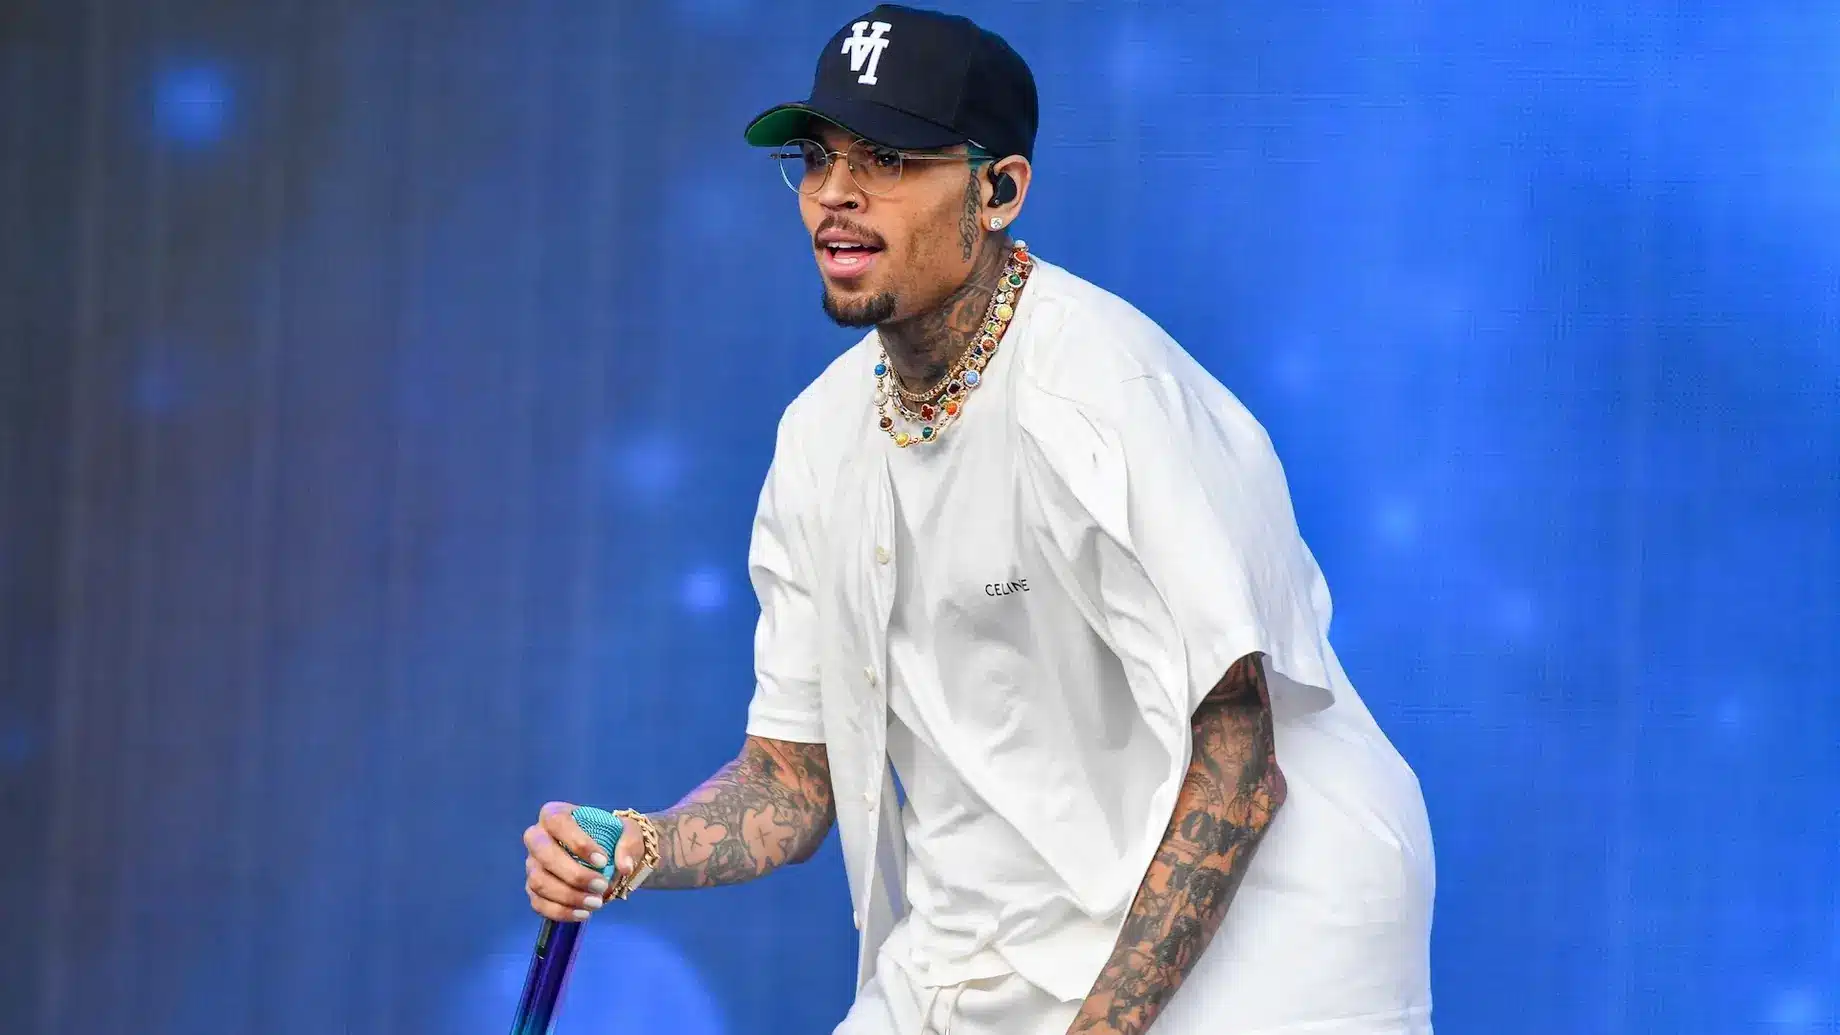 Chris Brown, A man with tattoos, wearing a navy blue baseball cap with "V" on it, glasses, a white short-sleeved shirt, and a white undershirt, performs on stage against a blue background, holding a purple microphone. He has multiple necklaces and bracelets.